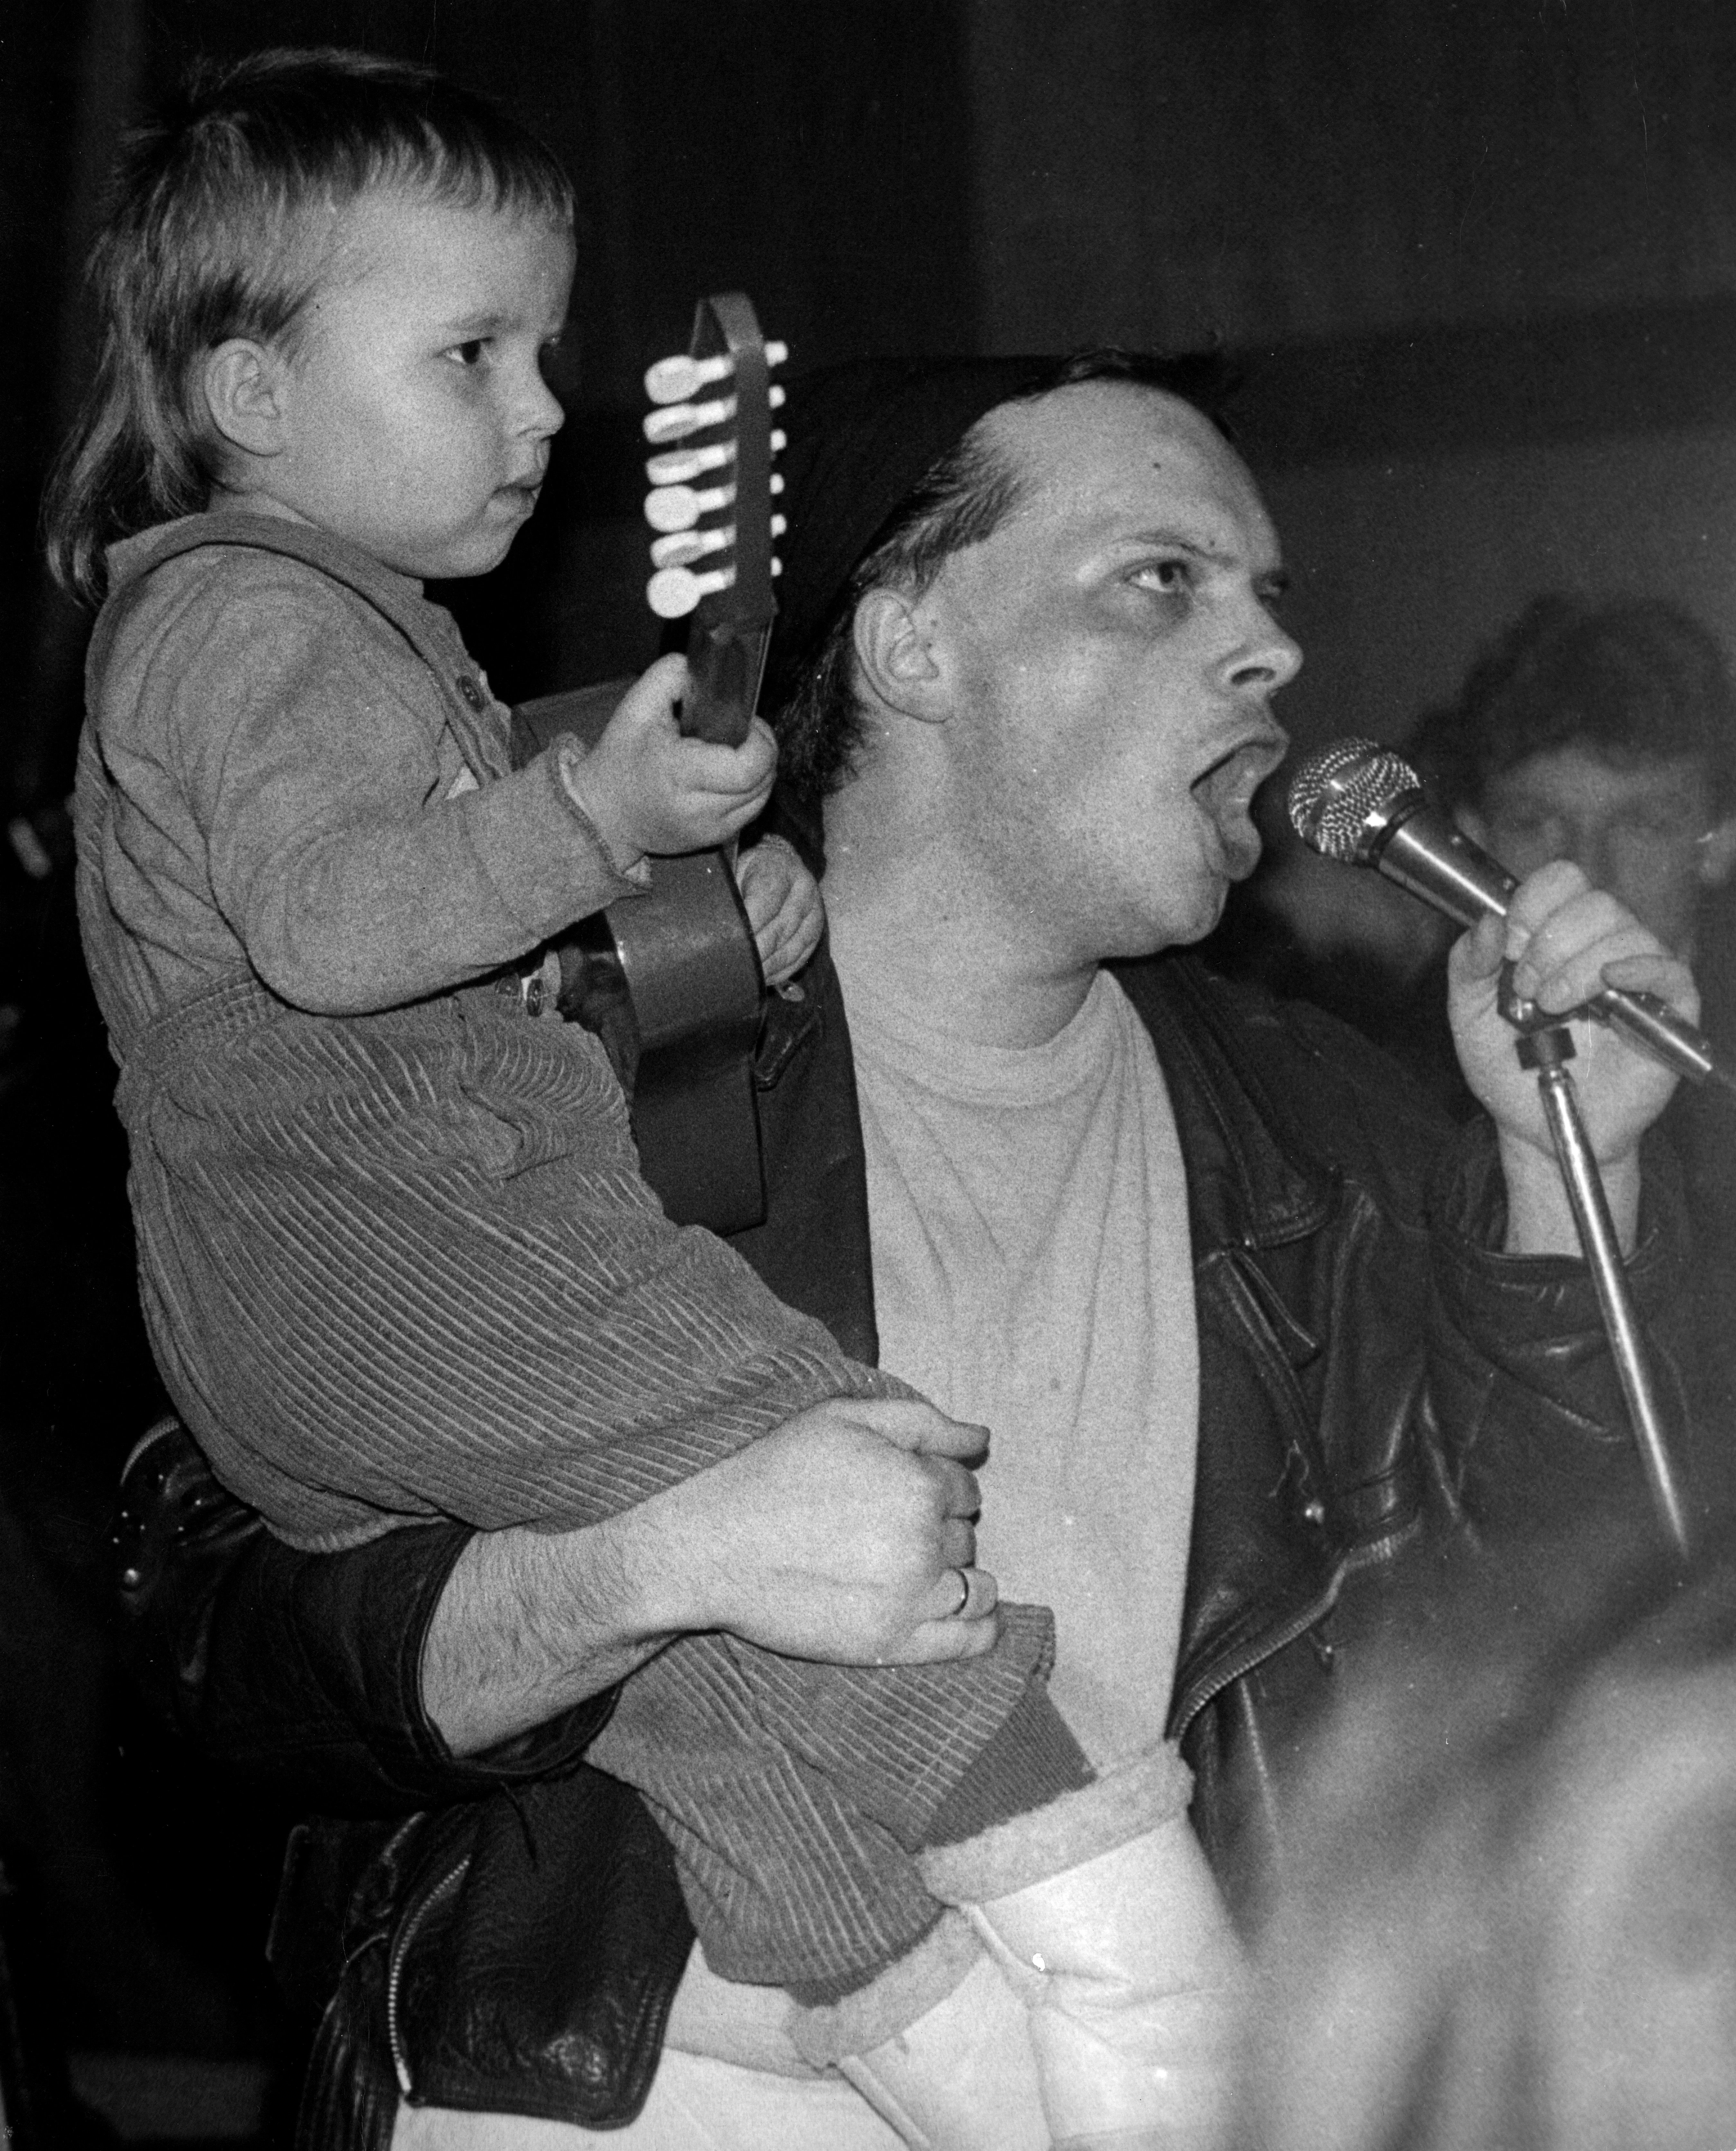 Krzysztof Skiba with his son Tymoteusz during the Big Cyc concert in student club Olimp in Łódź in 1988.